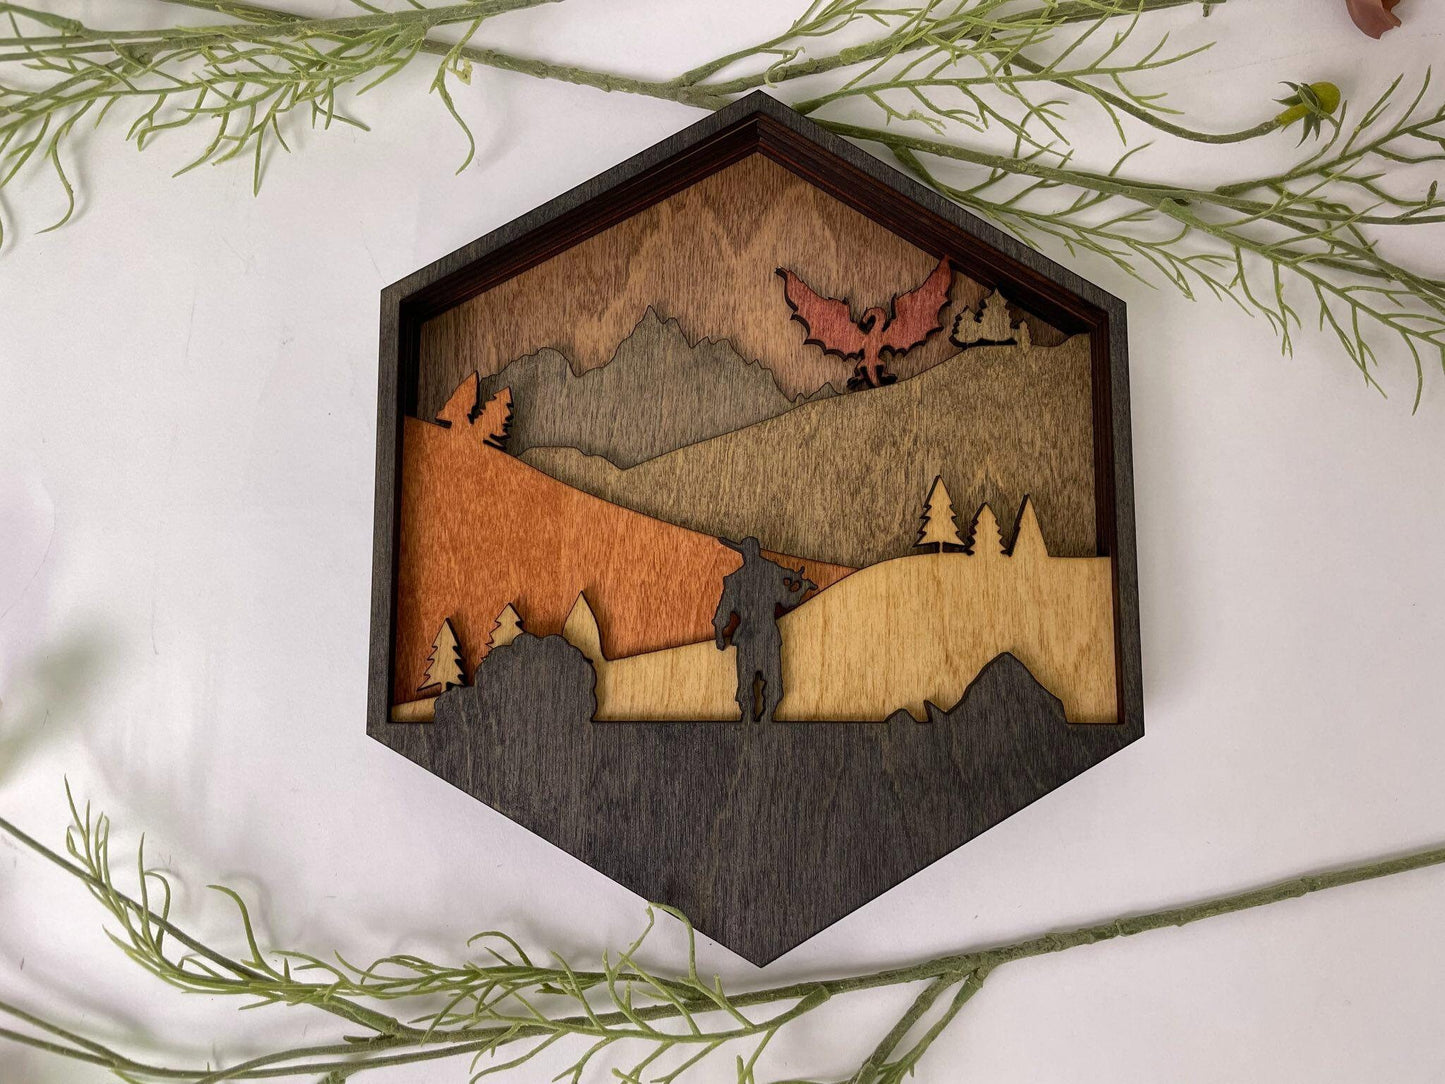 The Last Goodbye - Stained Wooden Art of a Warrior's Lonely Destiny - D20 Wooden Wall Art for Dungeons and Dragons Enthusiasts